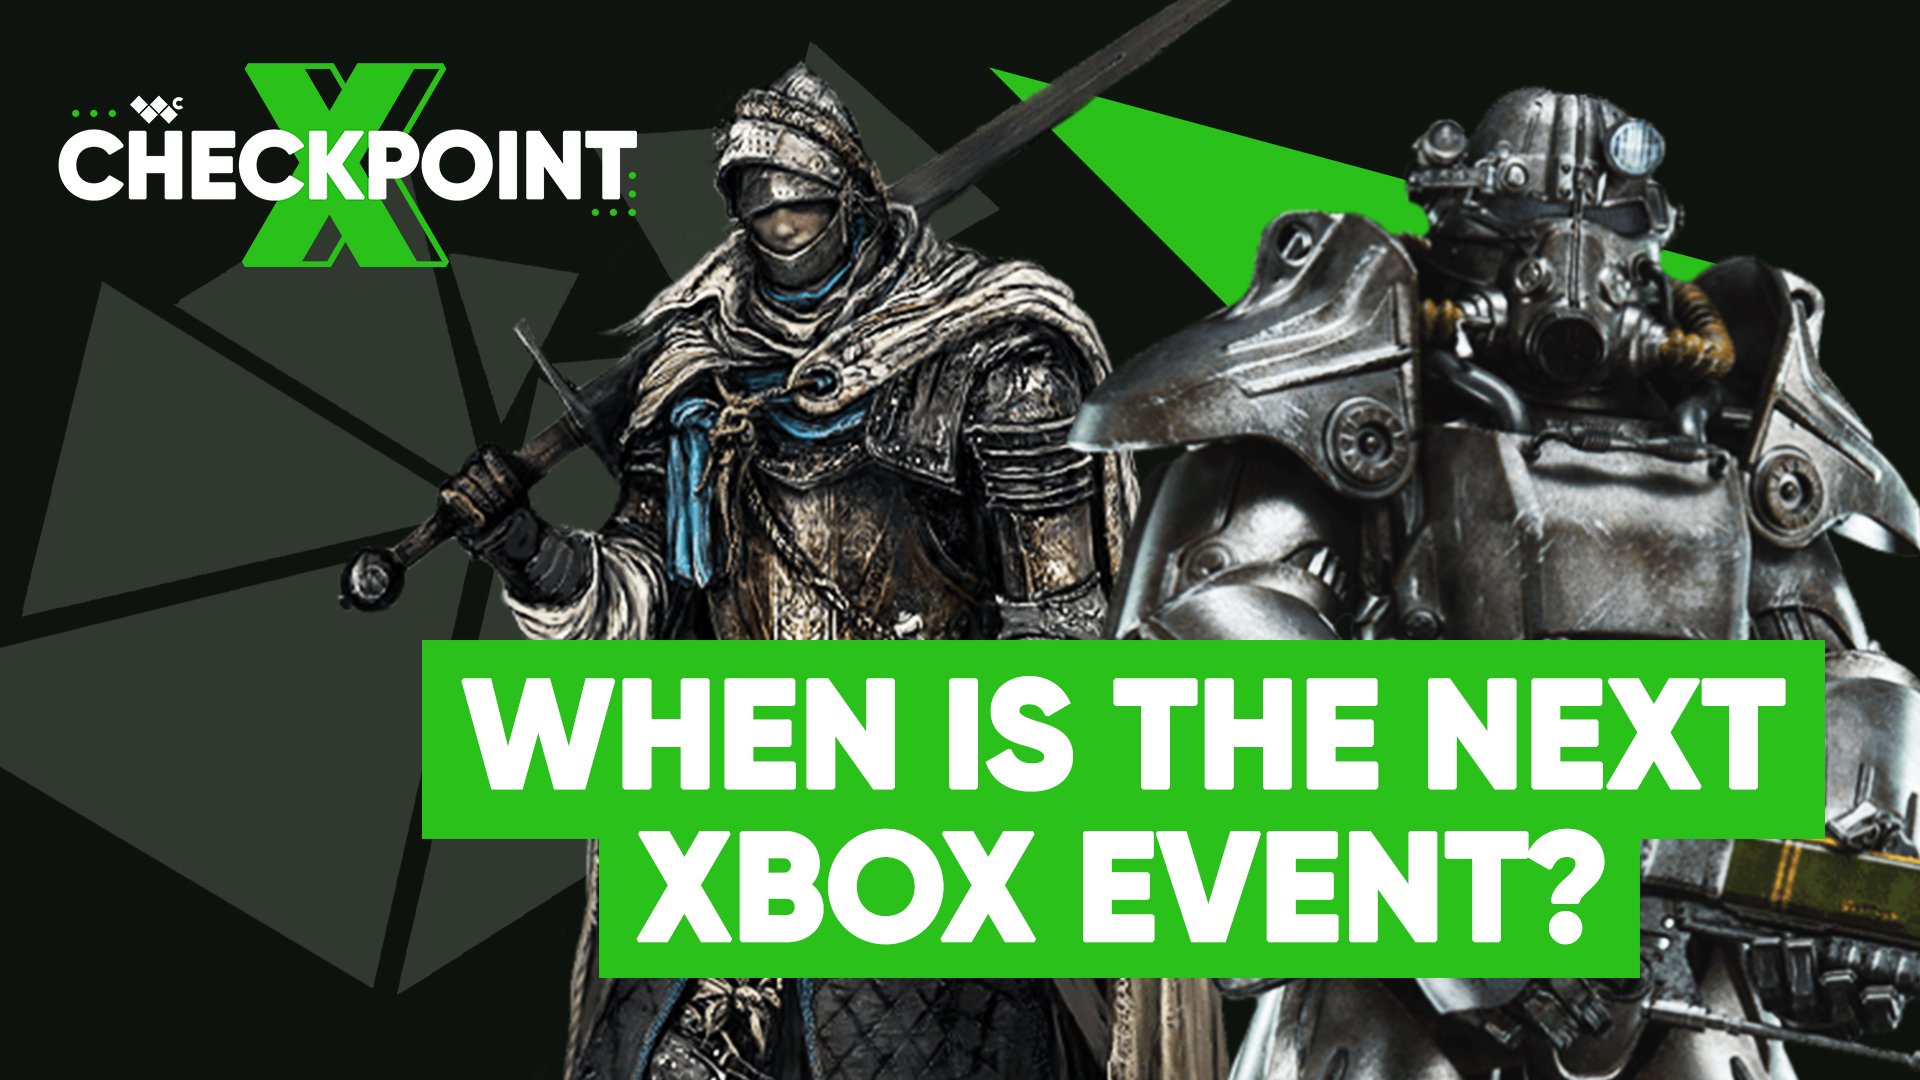 Checkpoint Xbox Event